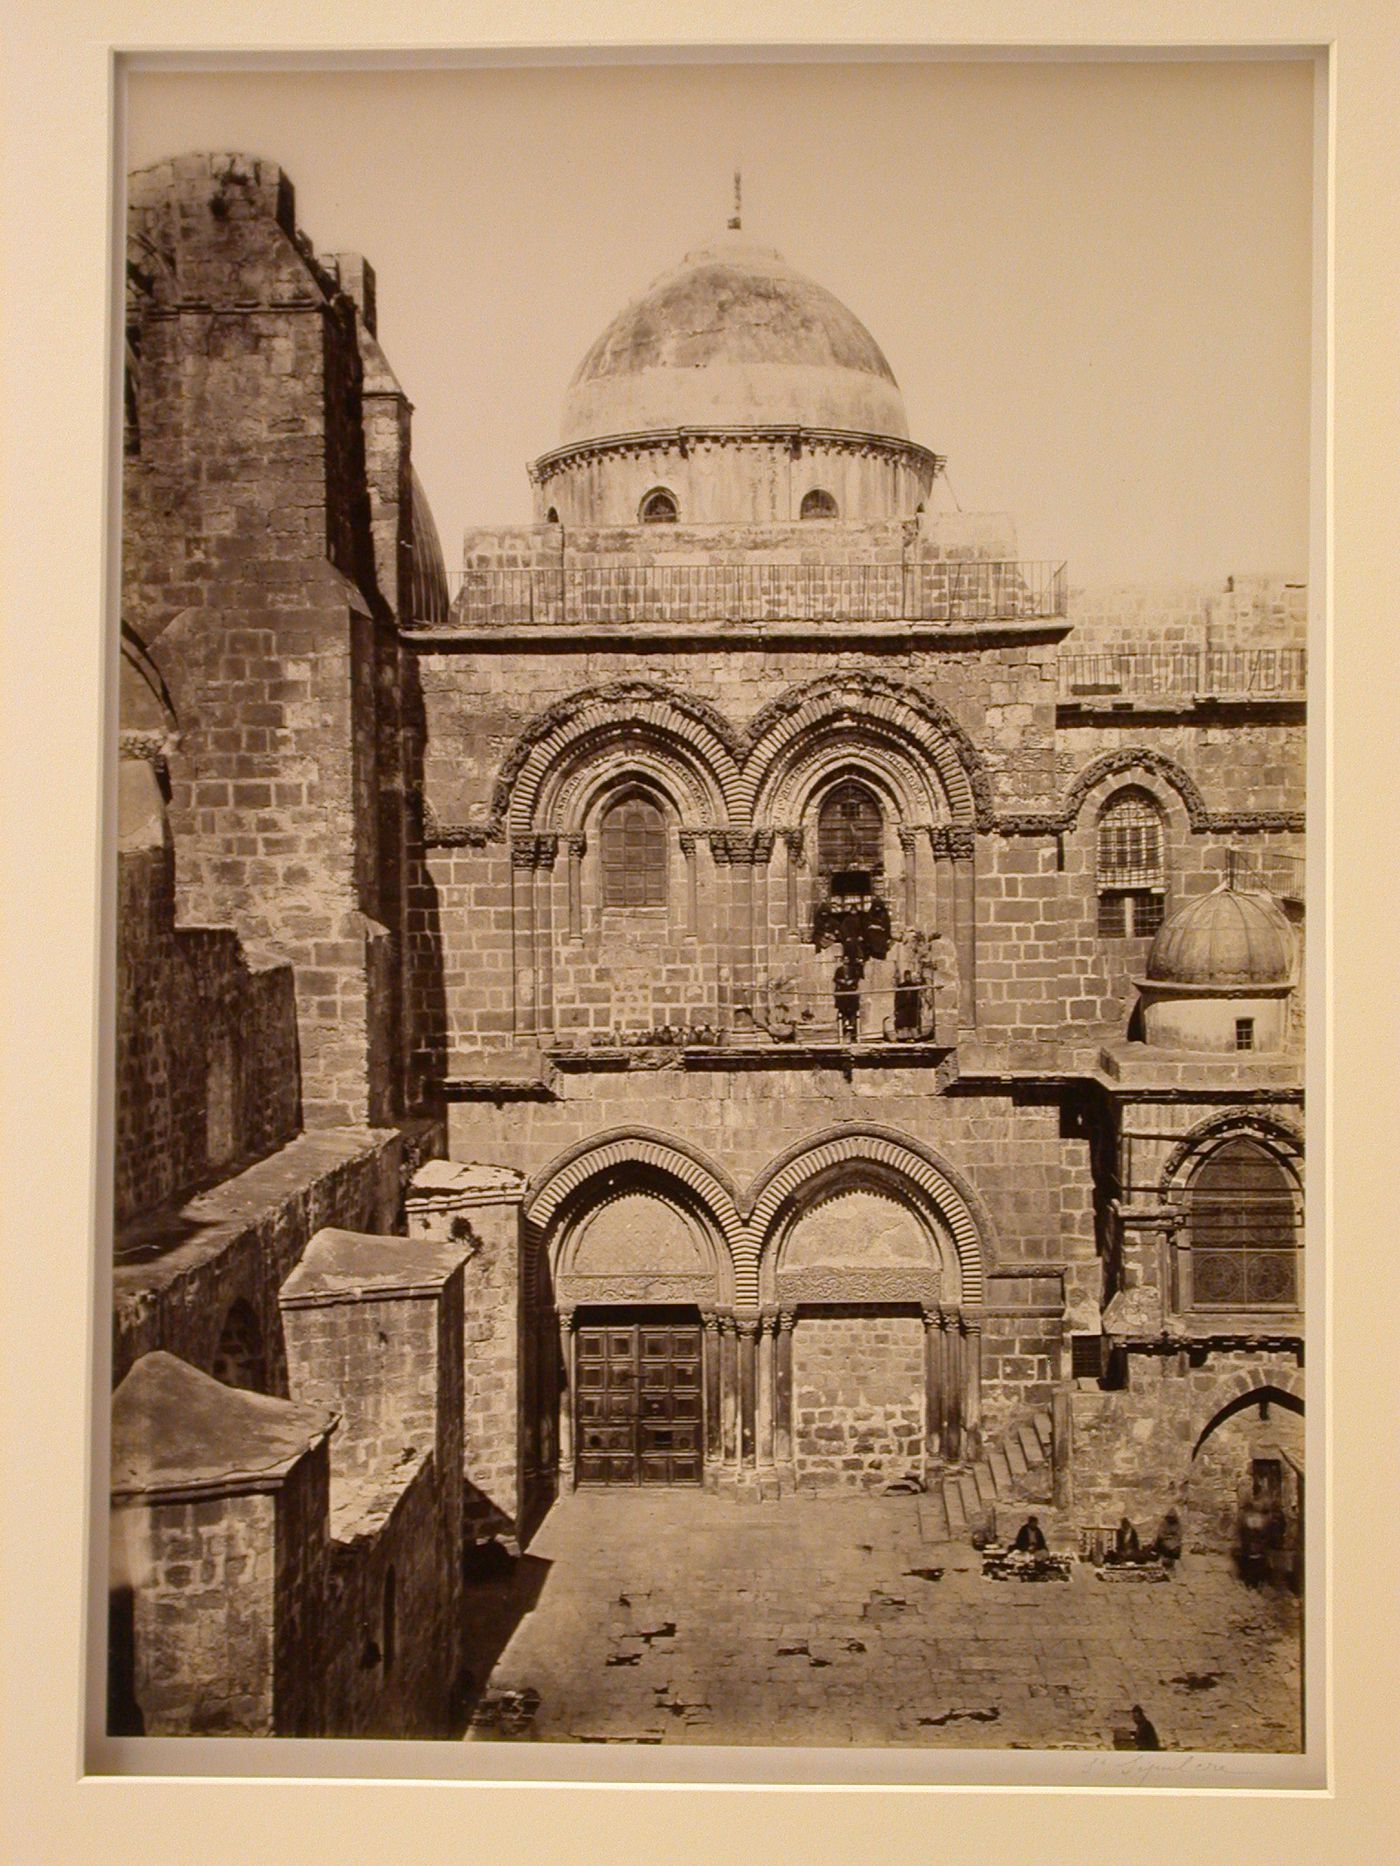 Church of the Holy Sepulchre, view of entrance façade including uppermost part of entrance, dome over the rotunda, with figures standing on second-story window ledge, Jerusalem, Palestine